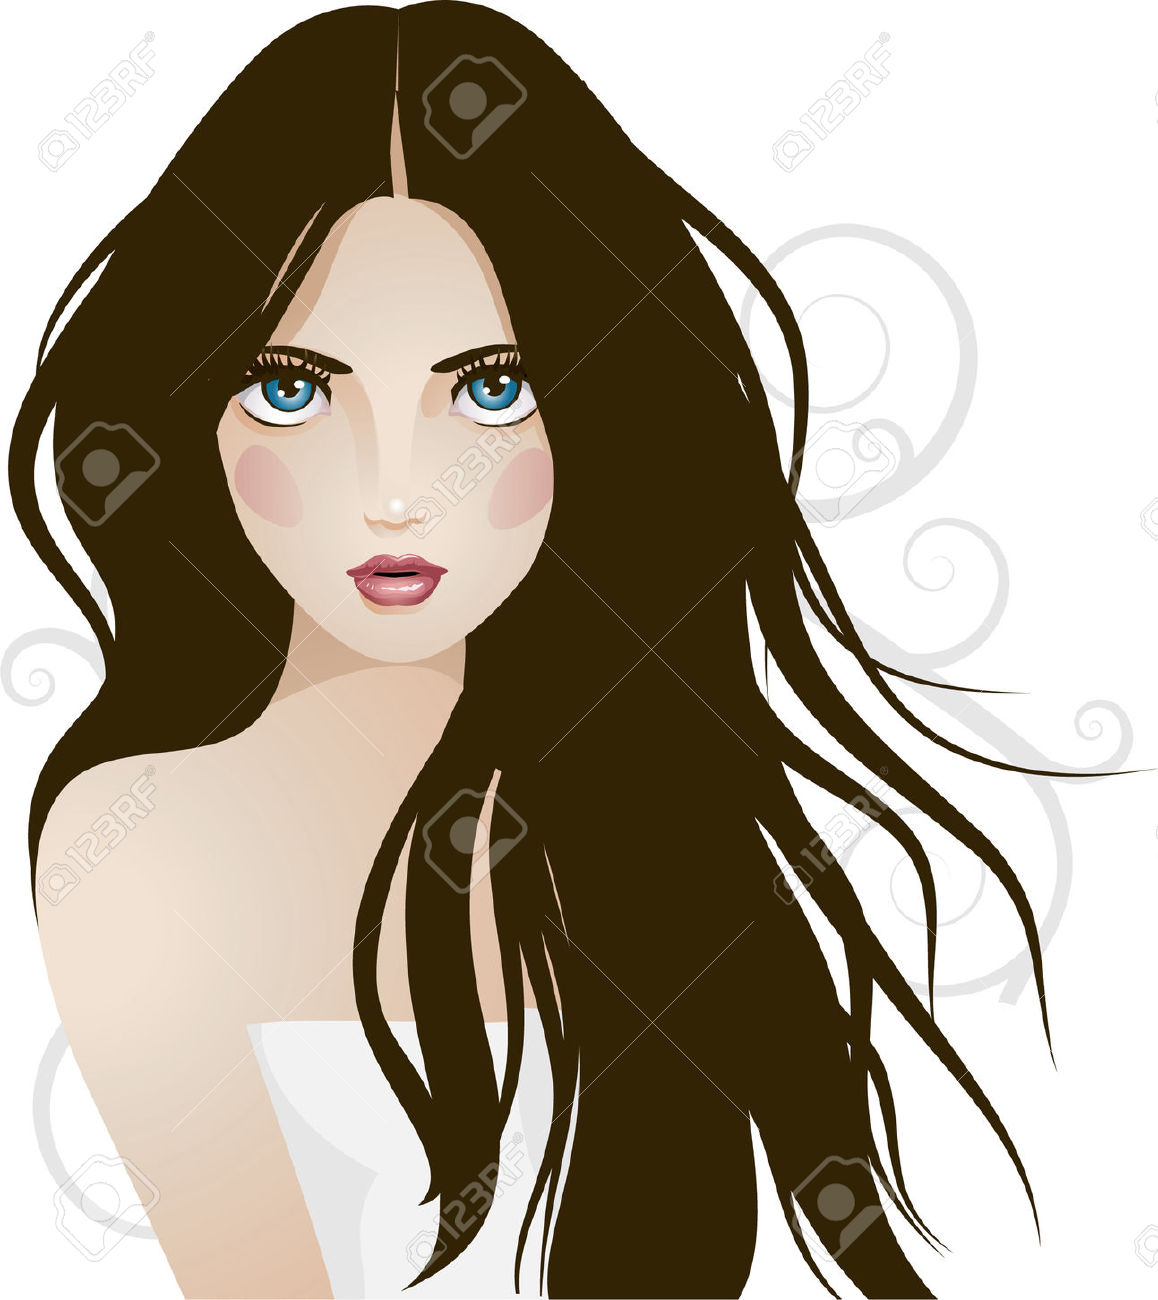 Pretty Lady Cartoon Images : Free Pretty Woman Cliparts, Download Free ...